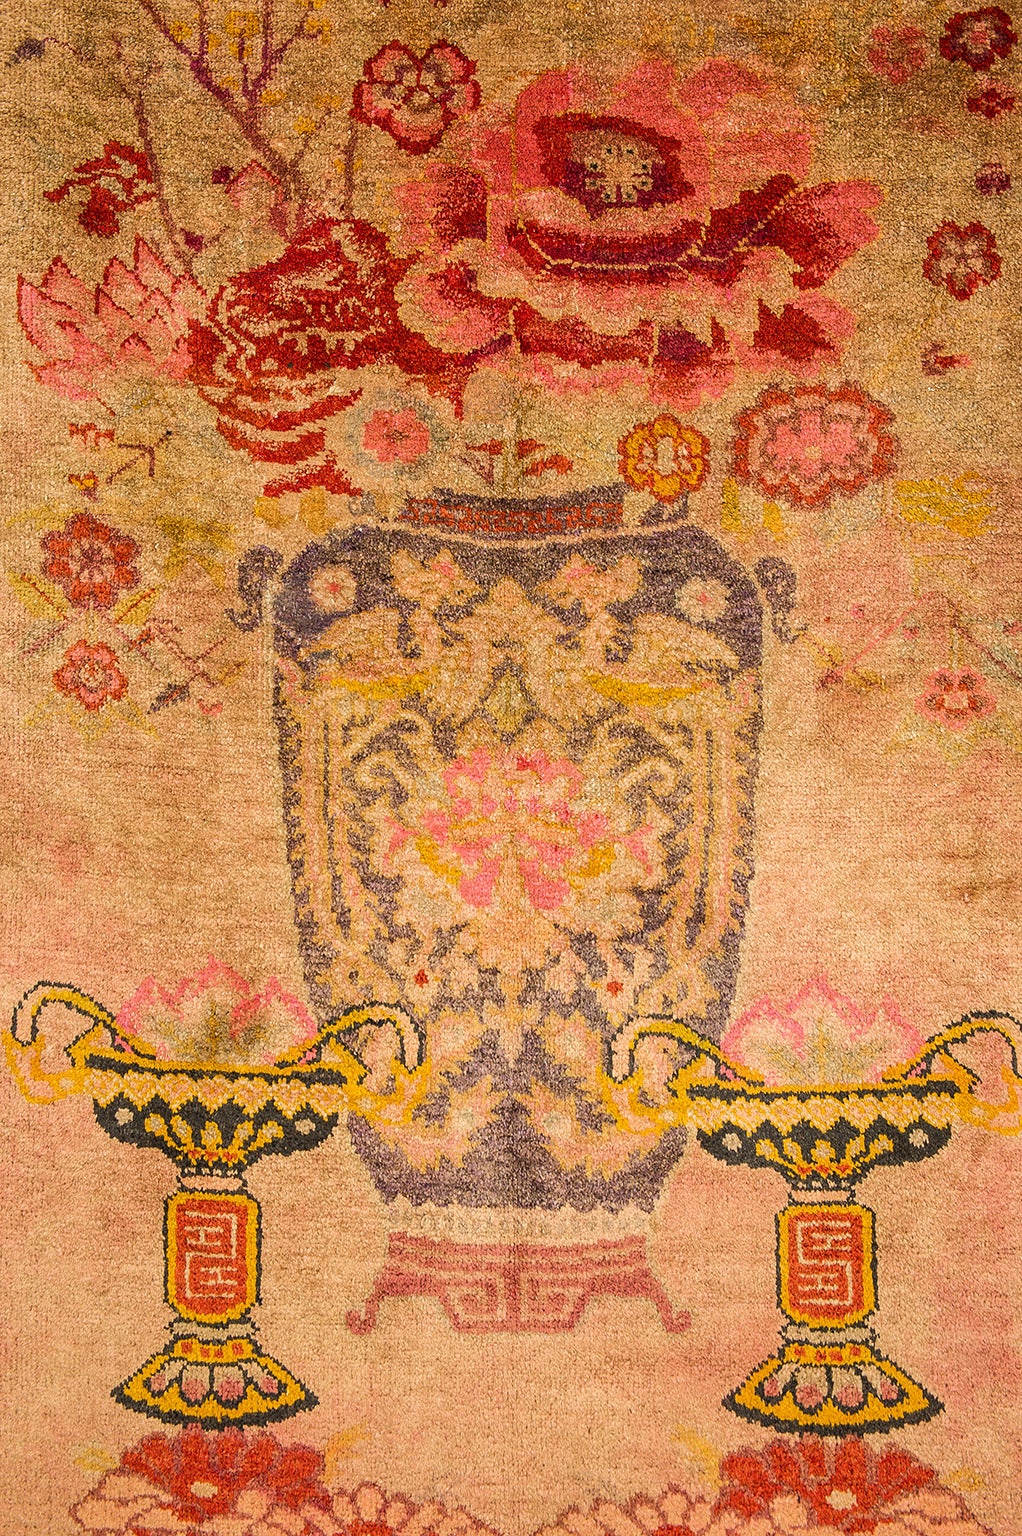 Big vase unusual motif for this Sinkiang, China carpet of the beginning of 20th century.  From Private Collection .
nr. 1229 -